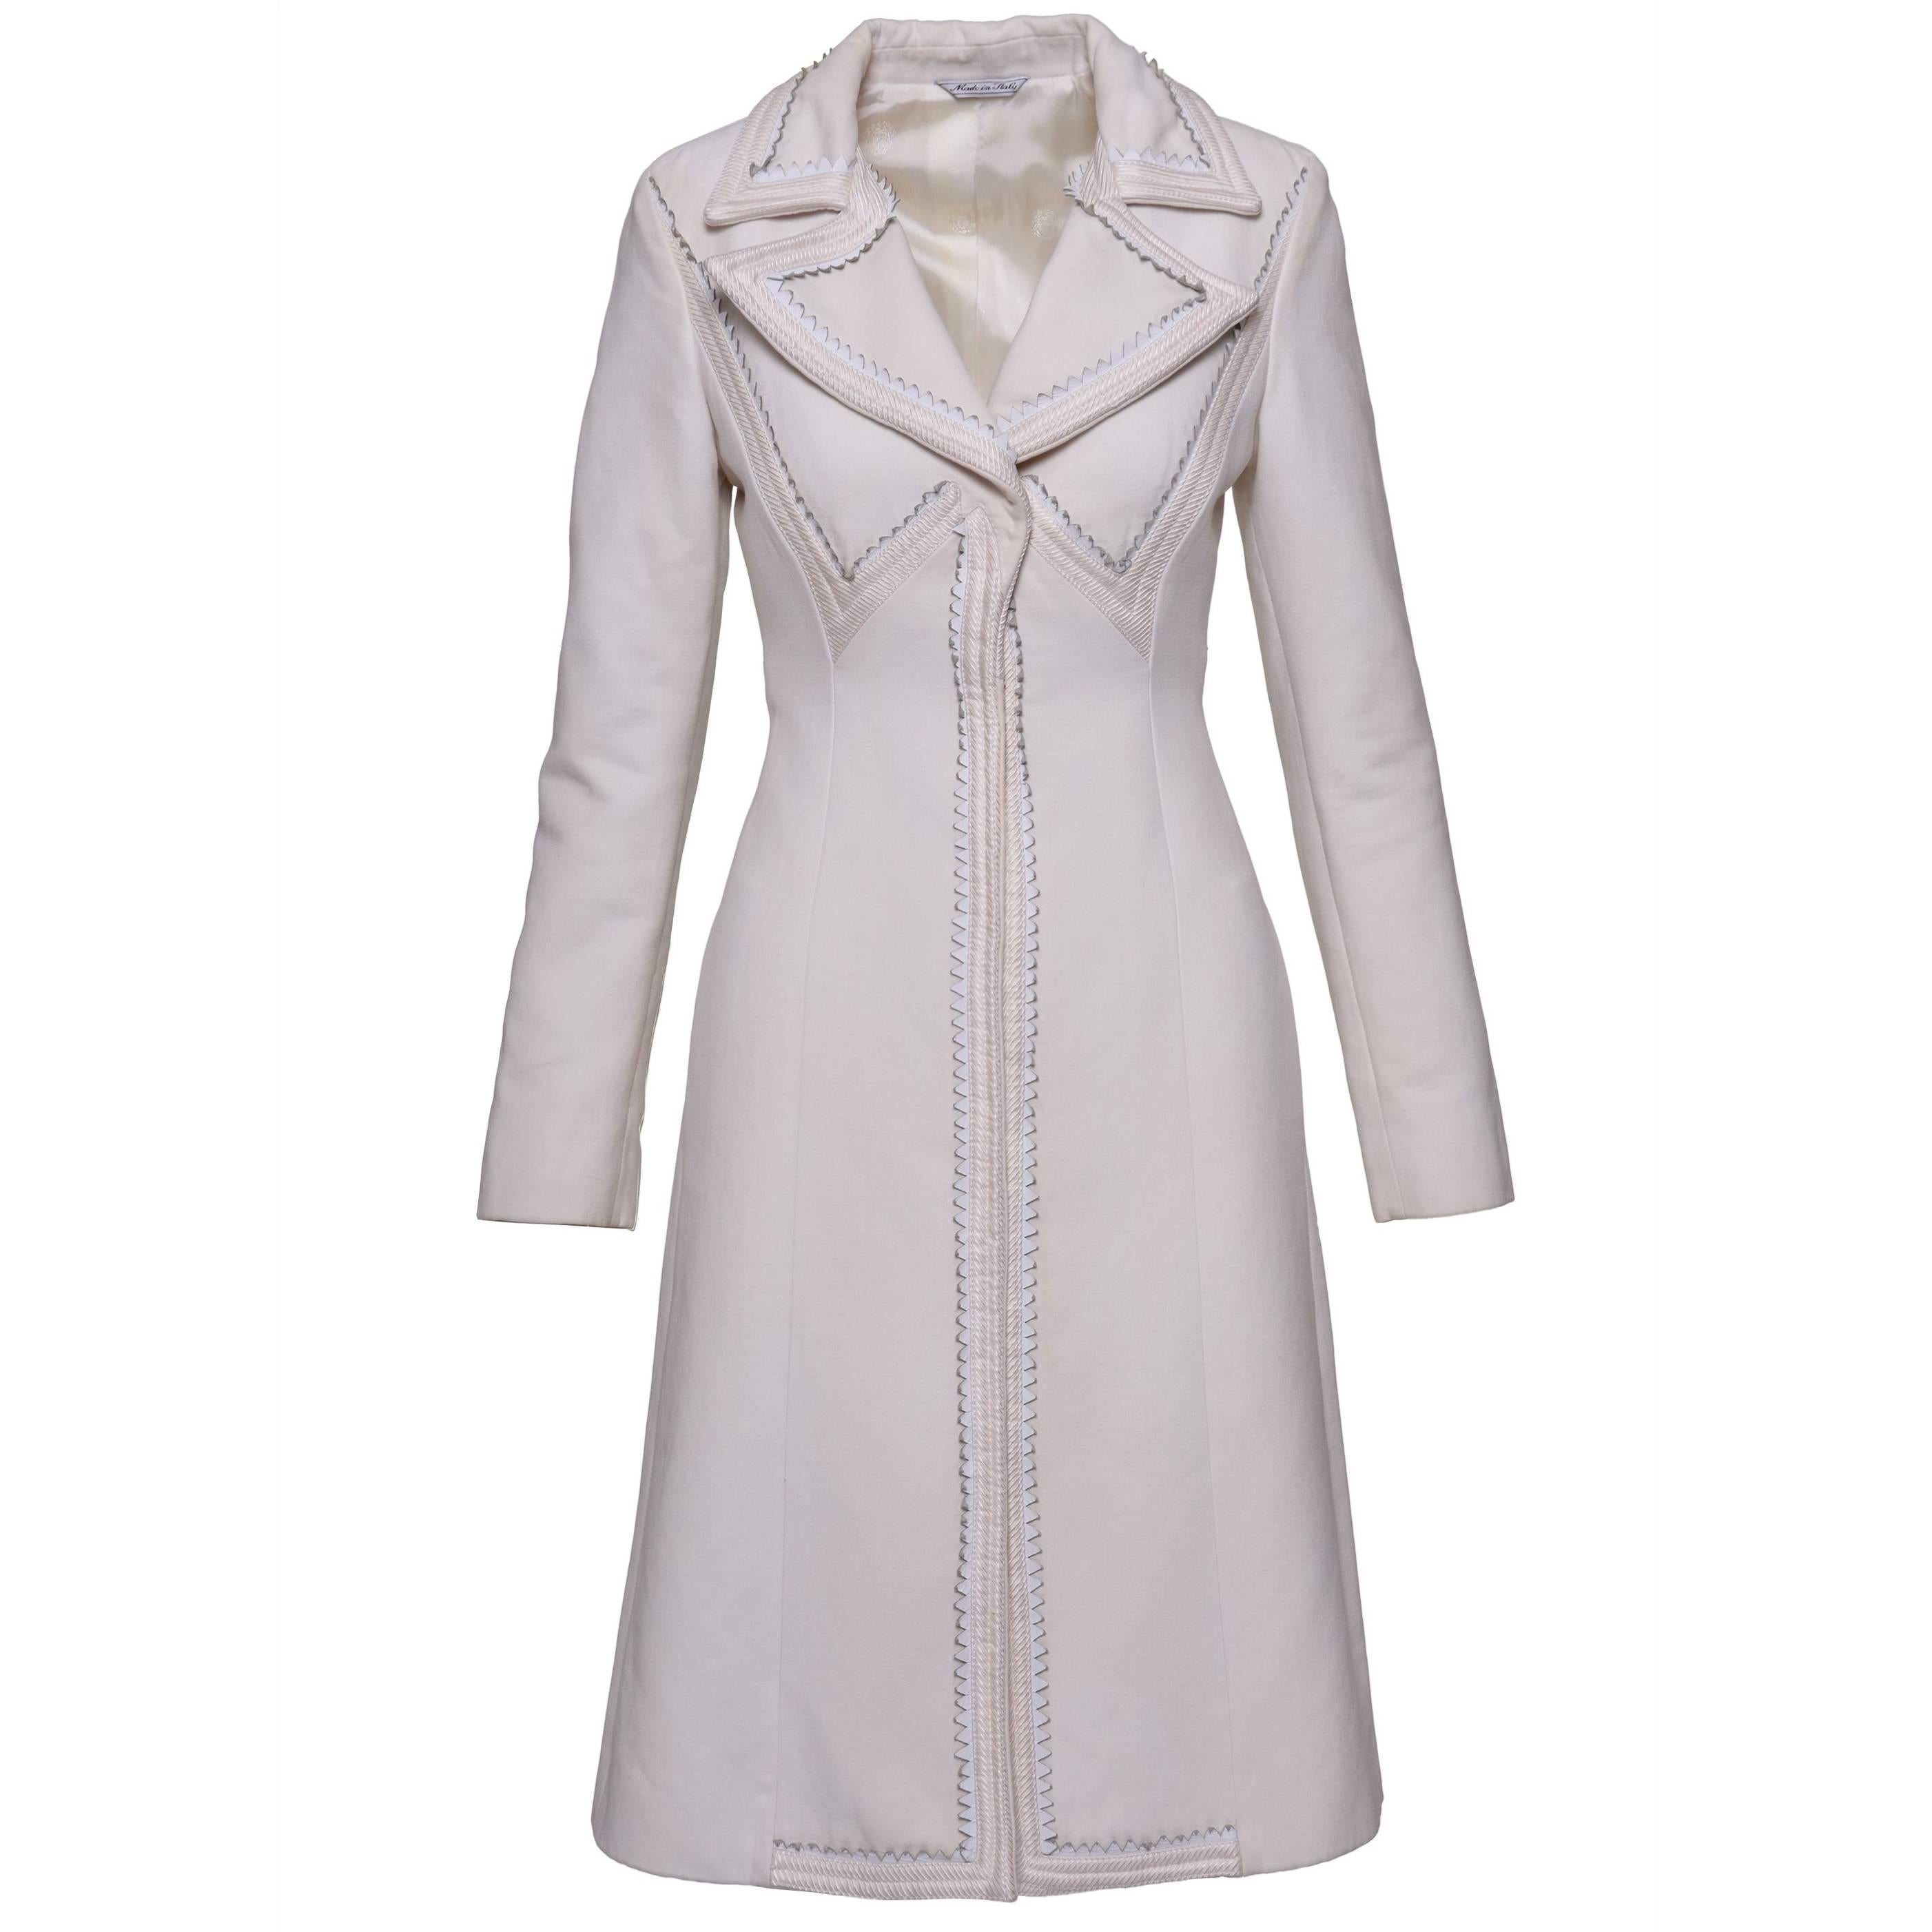 1990s GIANNI VERSACE Couture White Coat 